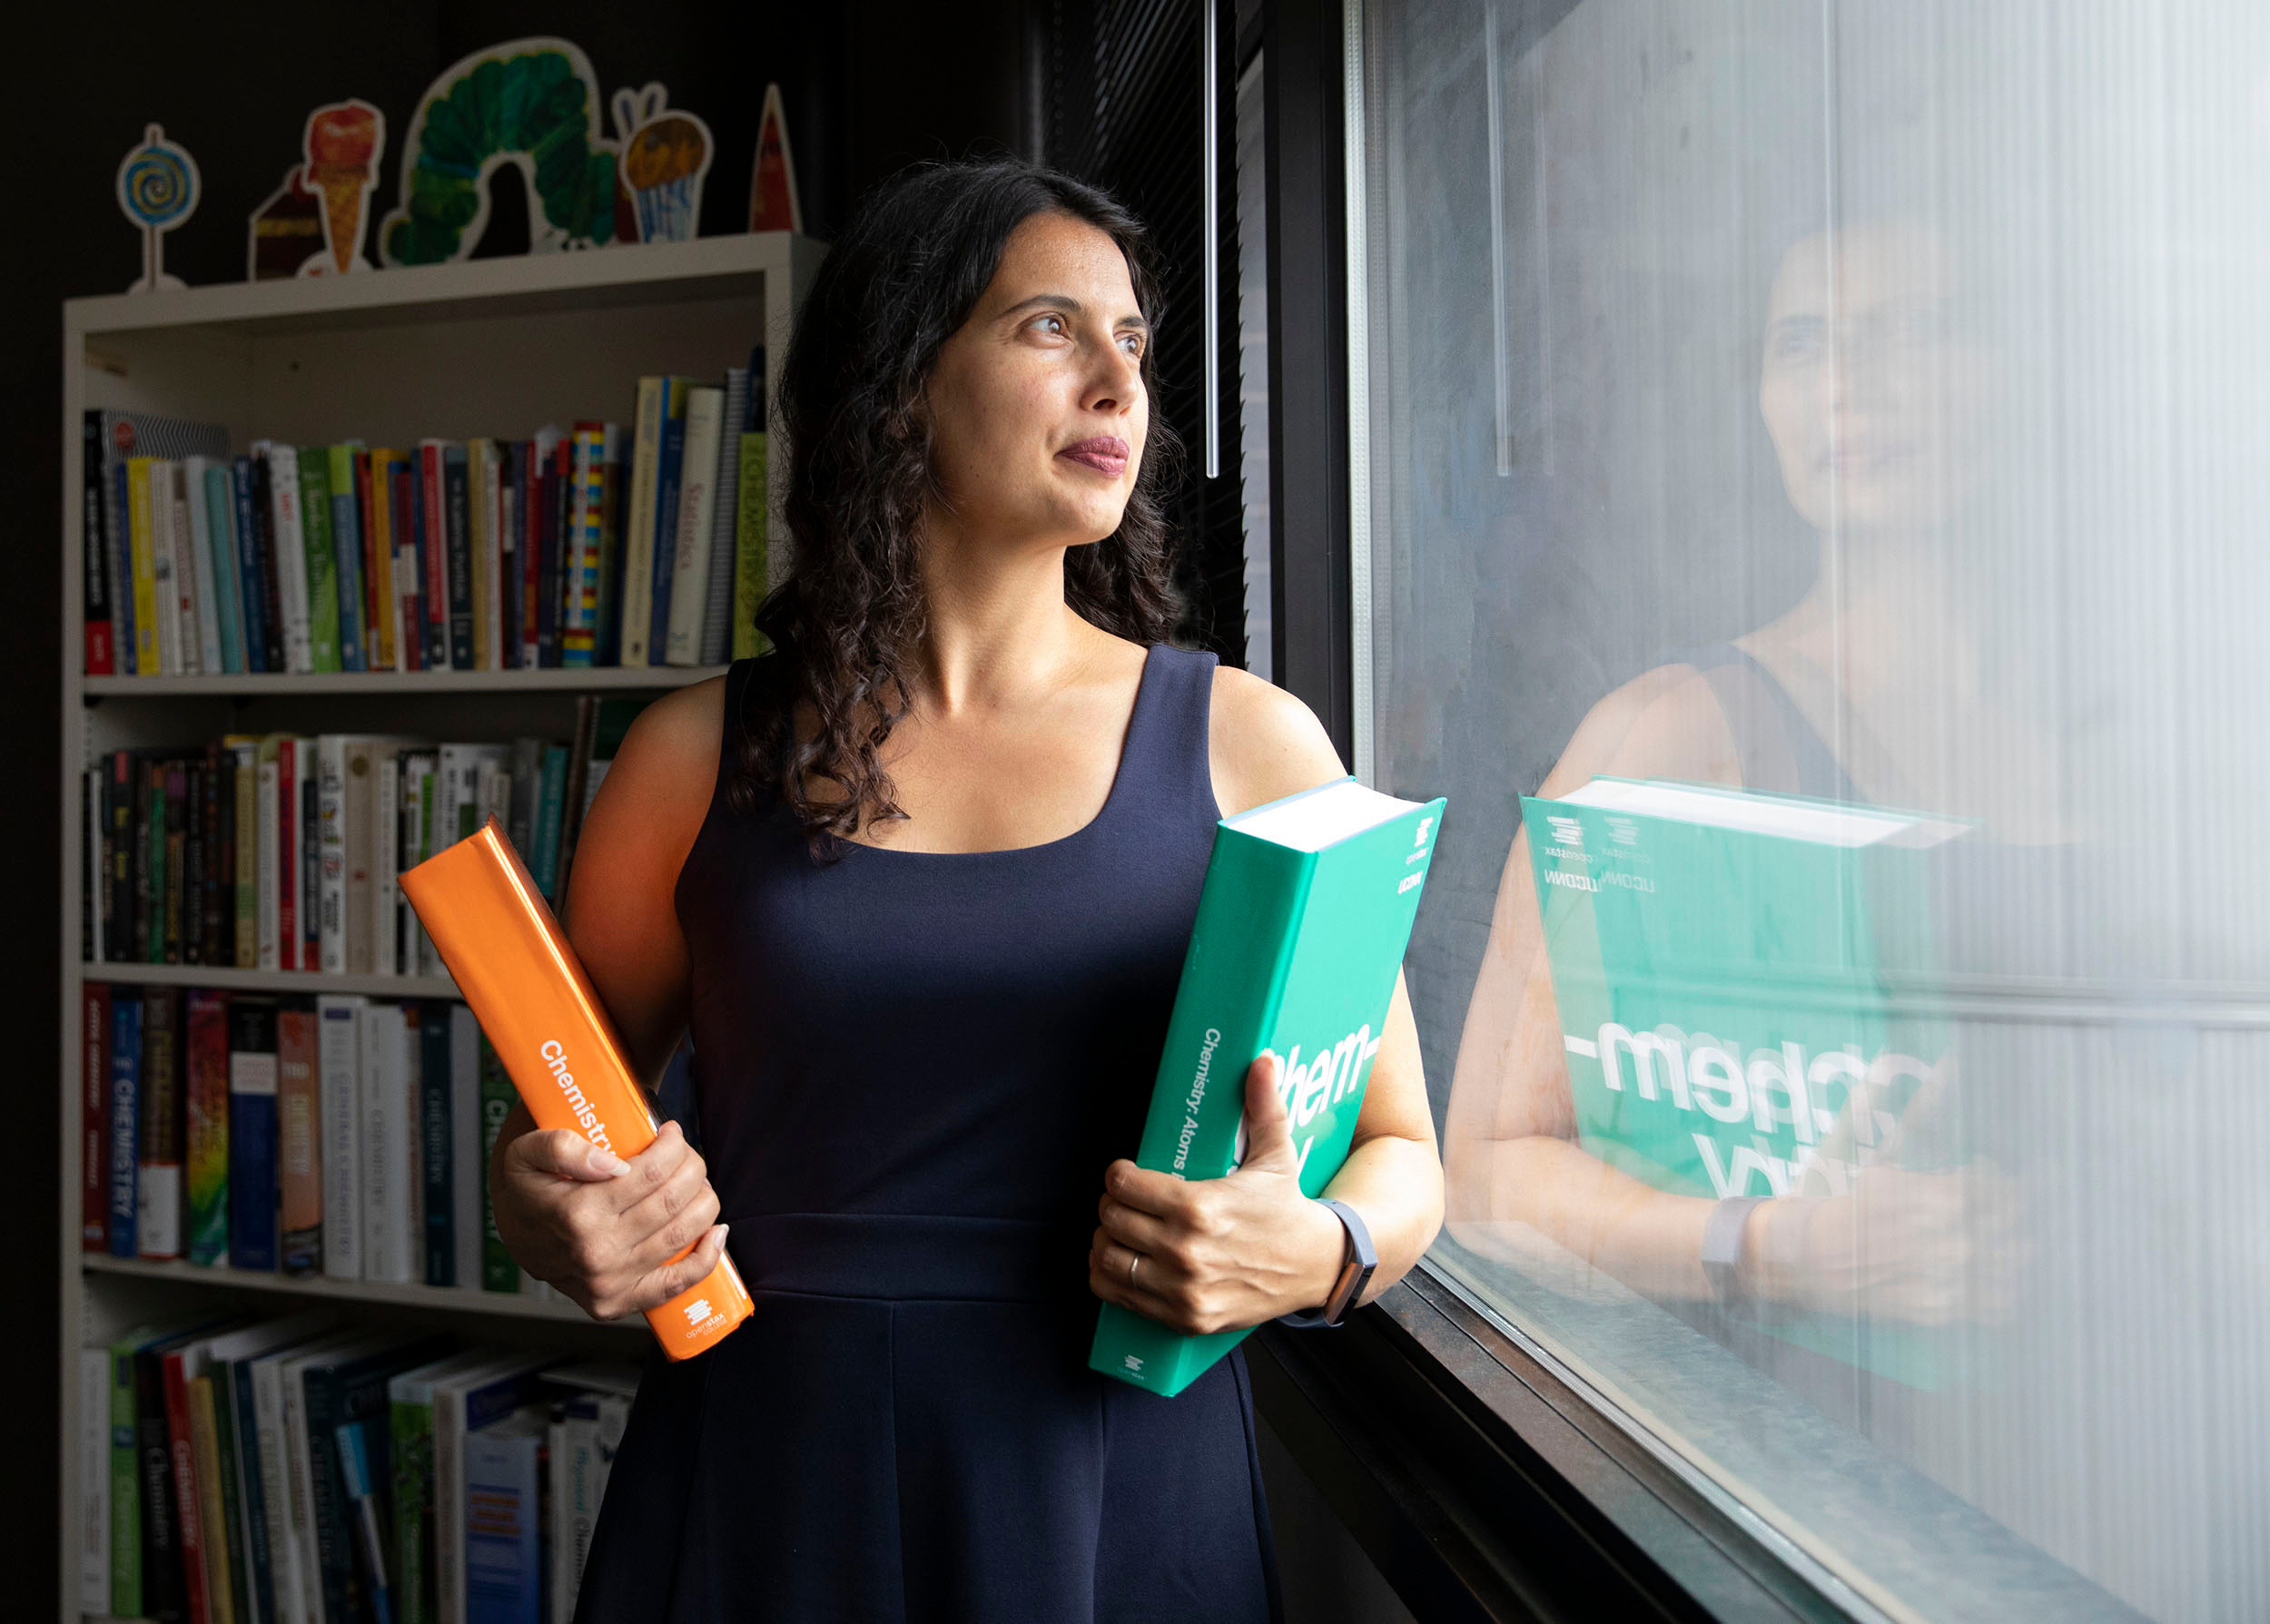 Emily Ragan looking out a window holding two books in each arm